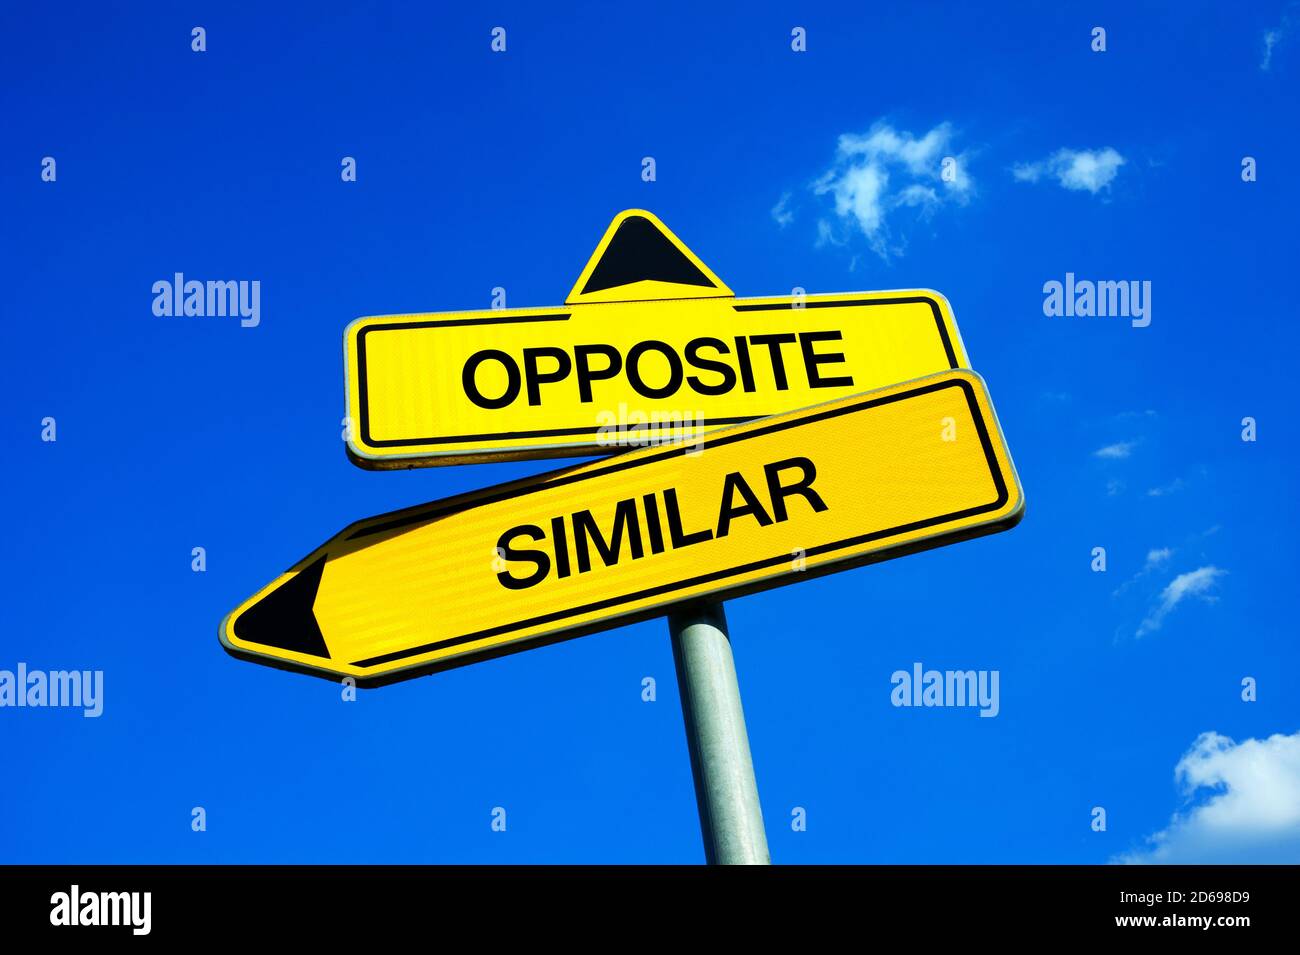 Opposite vs Similar - Traffic sign with two options - opposed and contrary vs similarity and resemblance Stock Photo